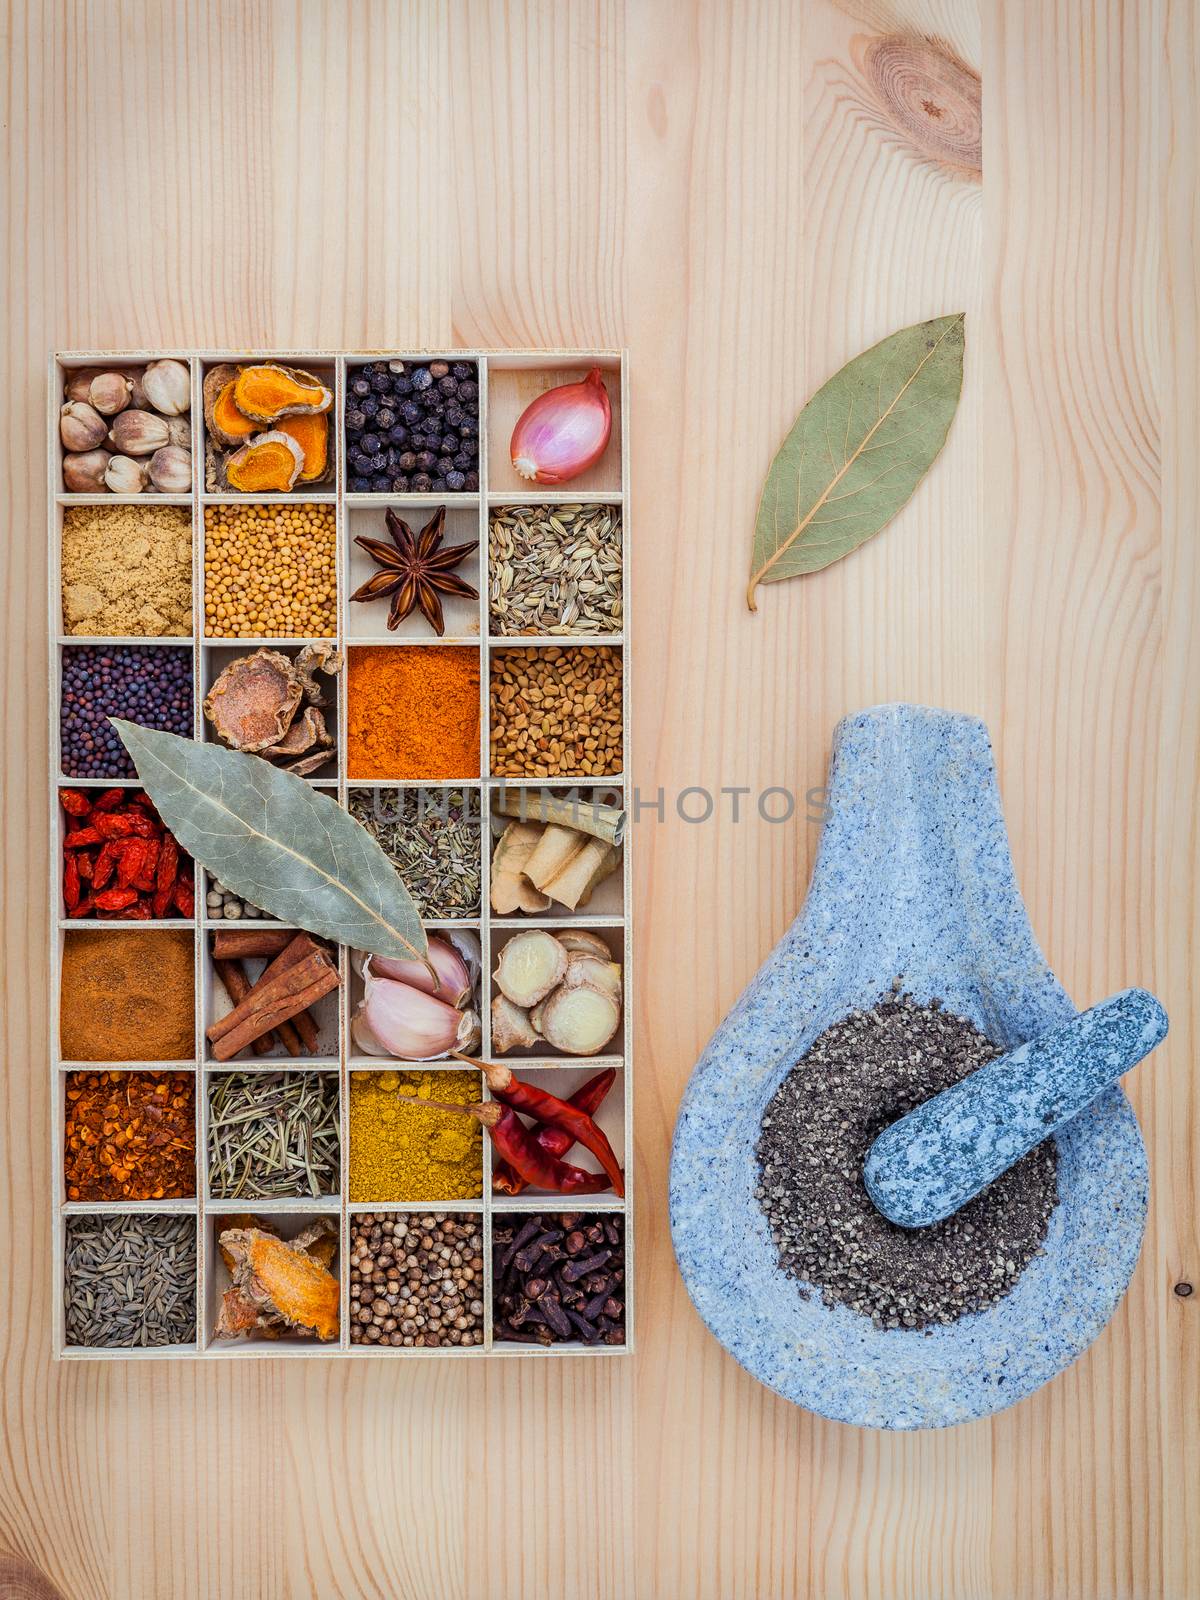 Assortment of spices food cooking ingredients in wooden box and  by kerdkanno